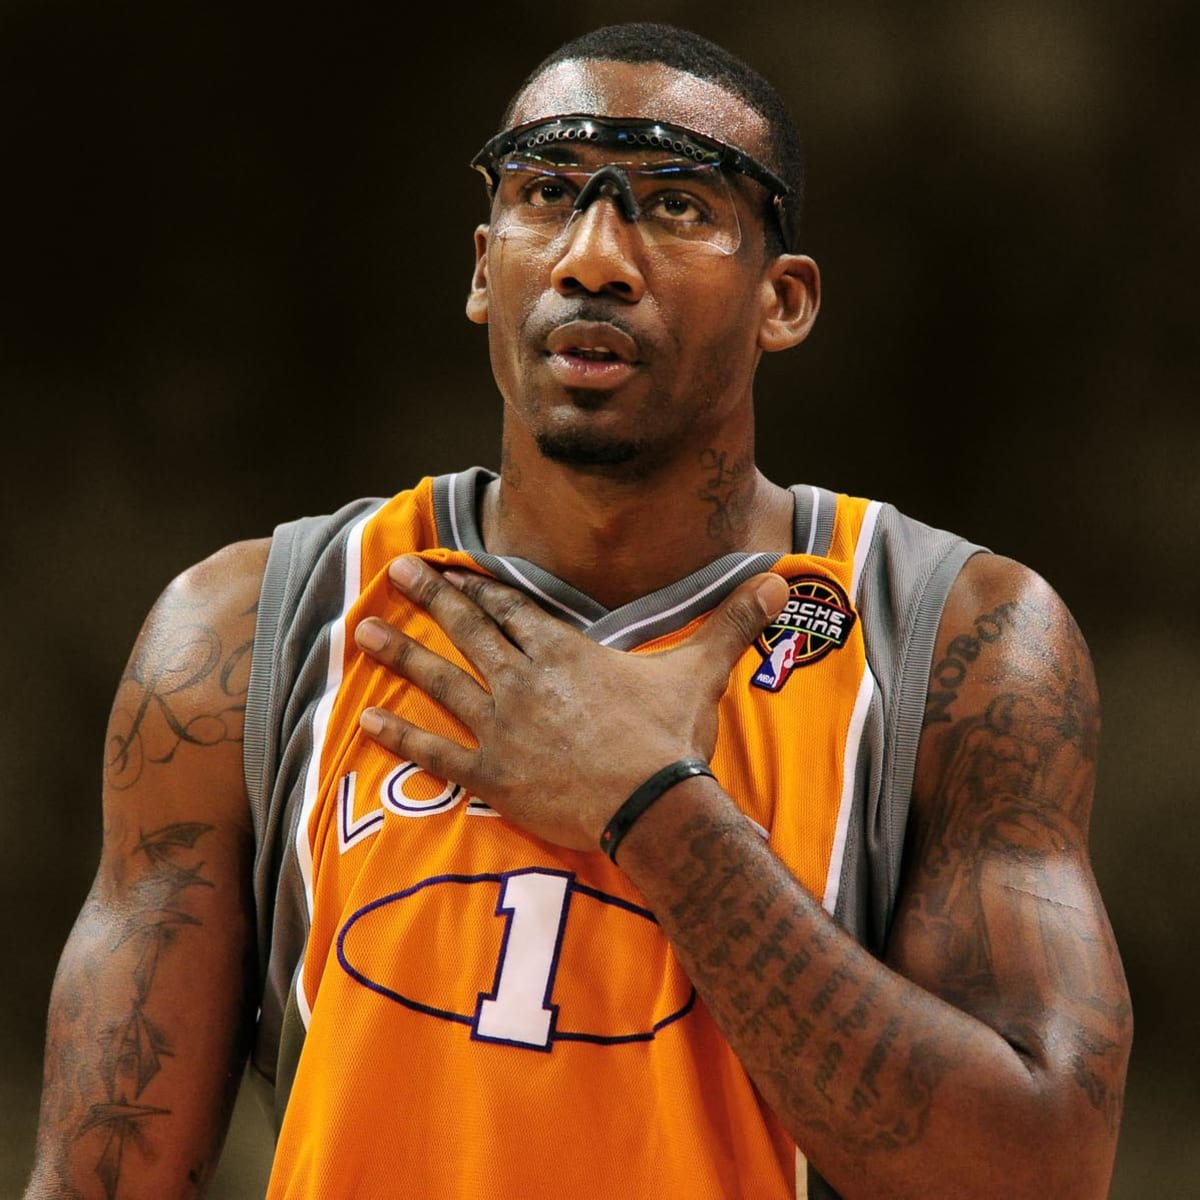 LeBron James and Amar'e Stoudemire will be teammates, not with